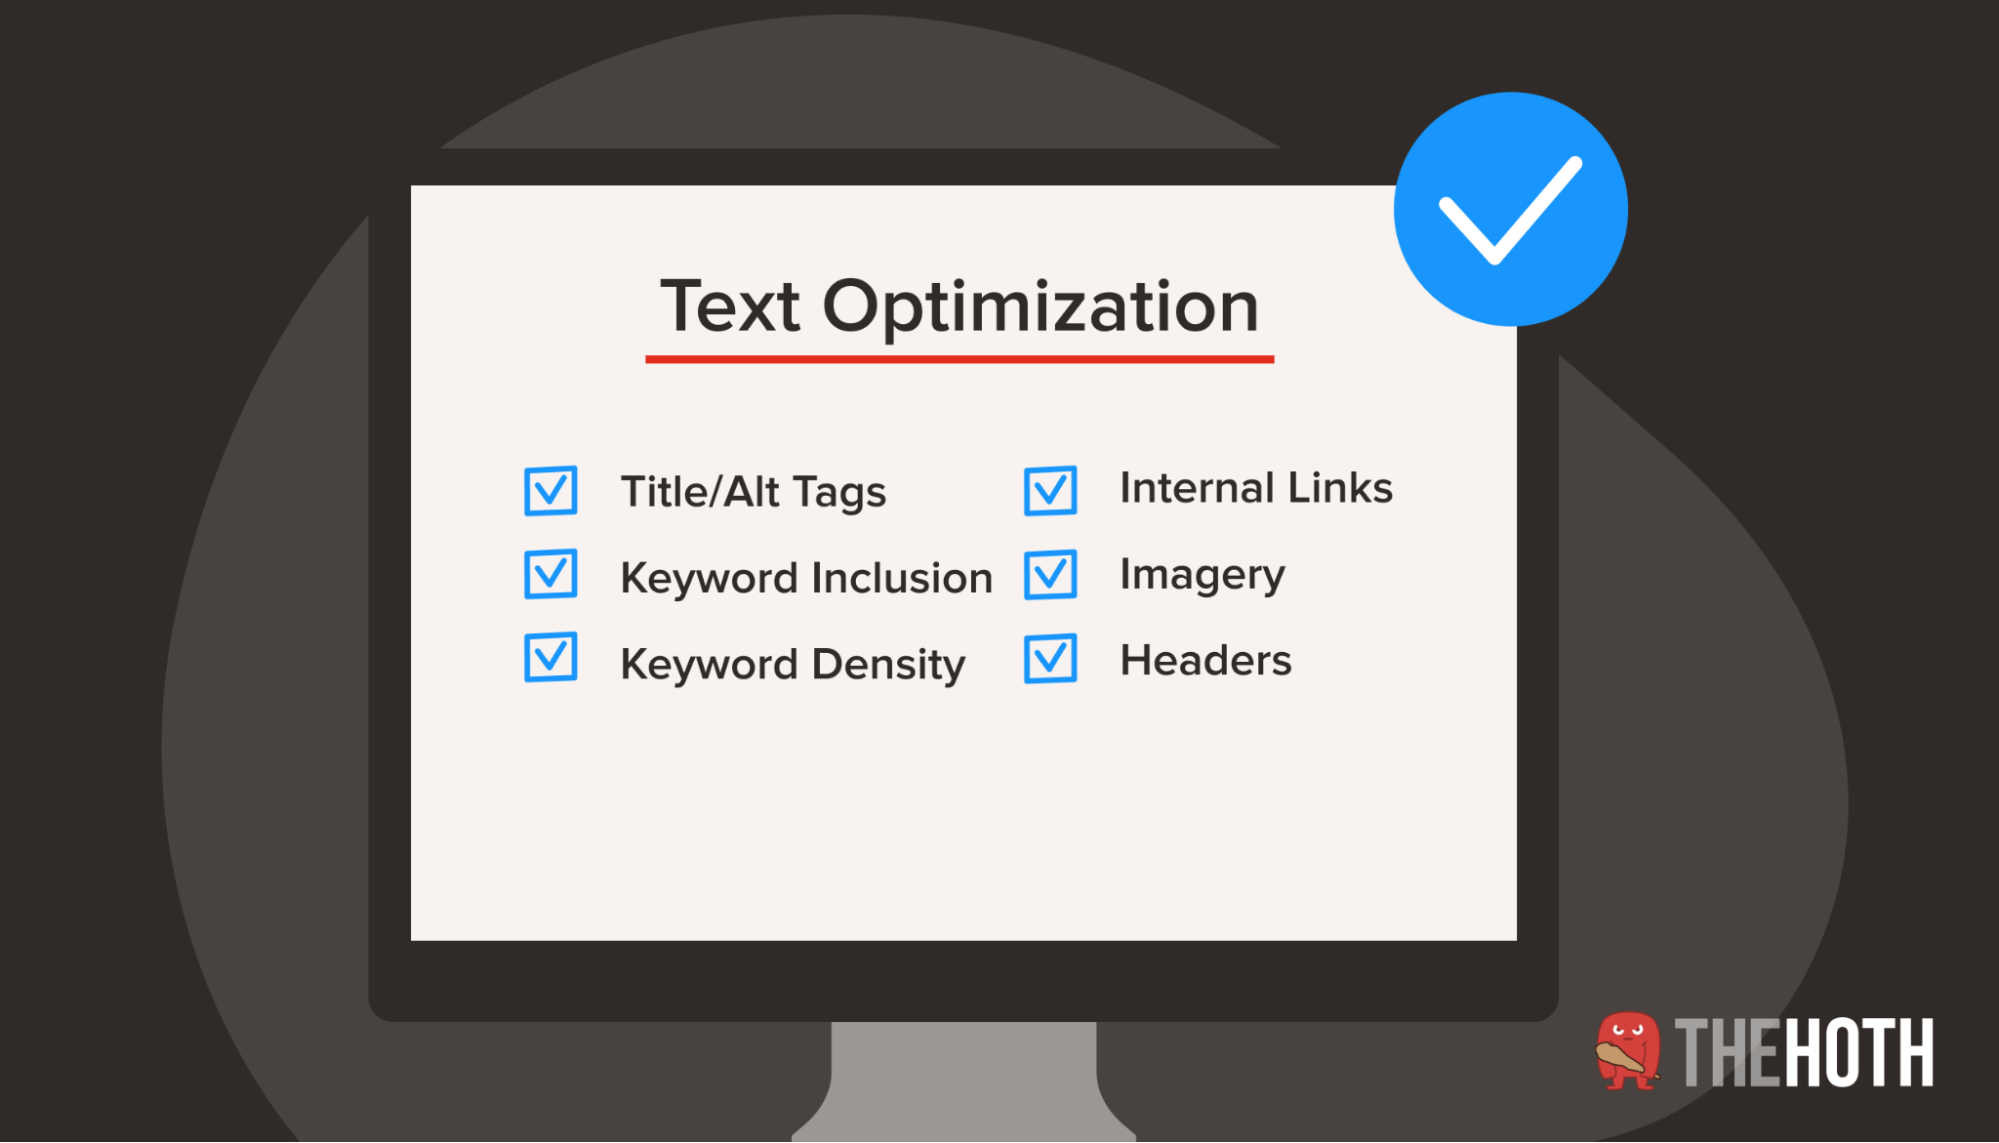 A checklist to follow when optimizing text-based content